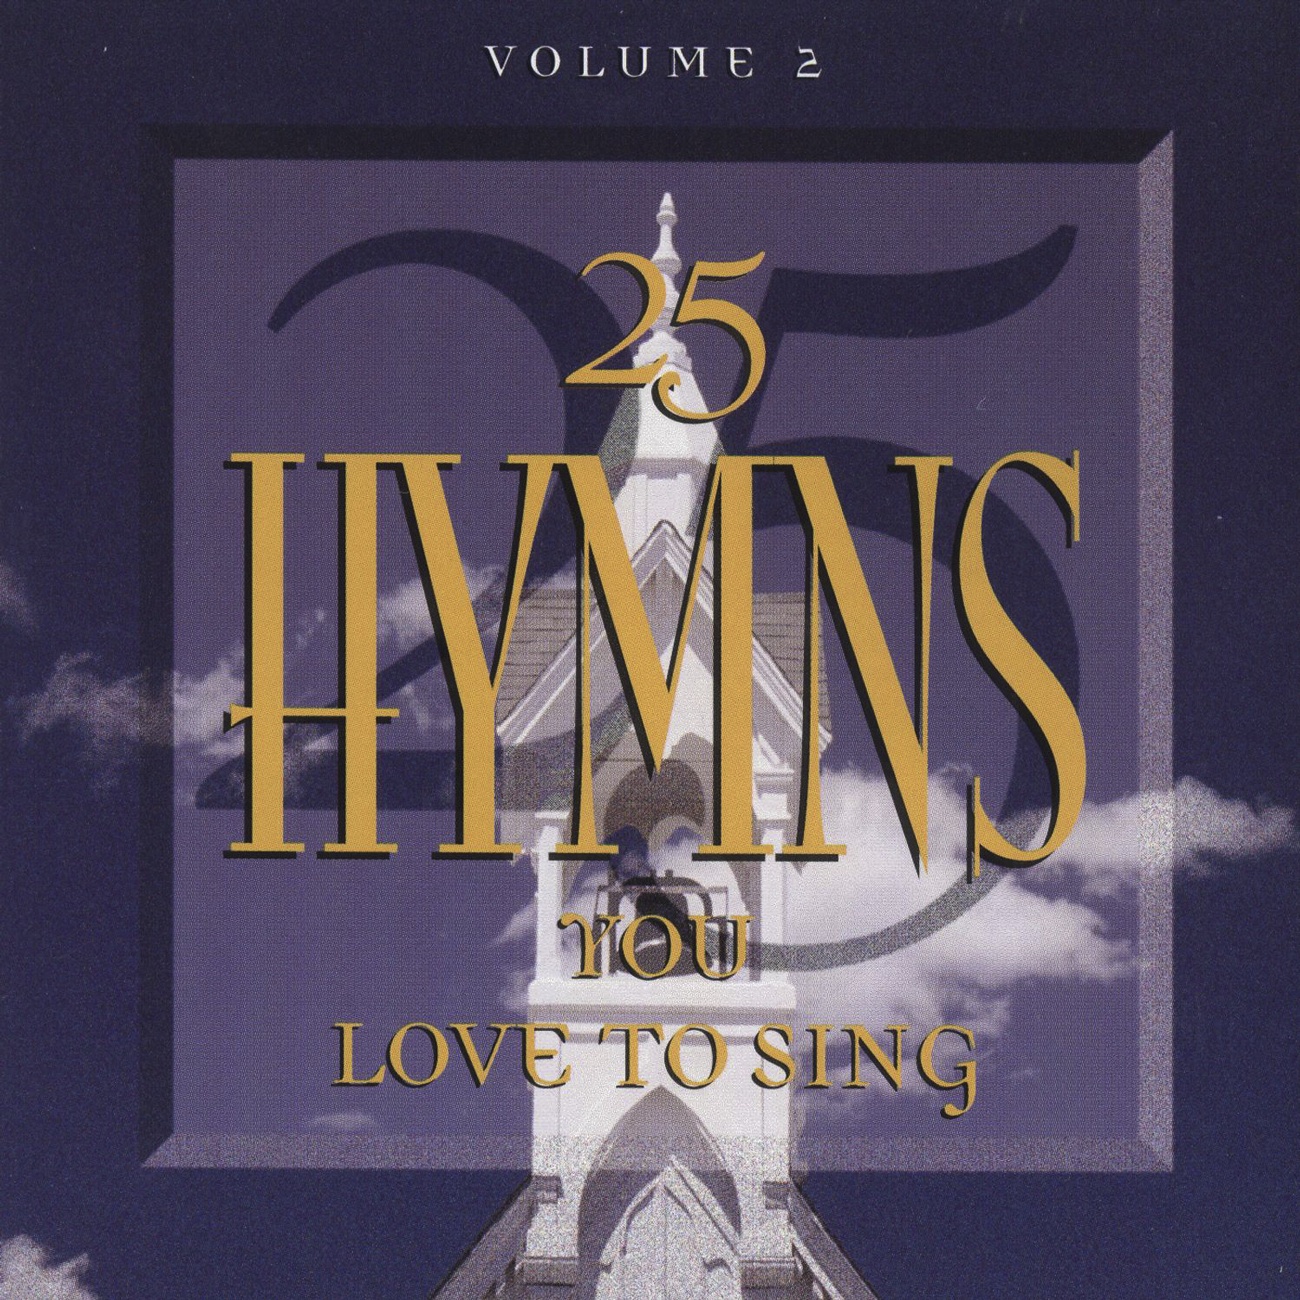 And Can It Be (25 Hymns Volume 2 Album Version)